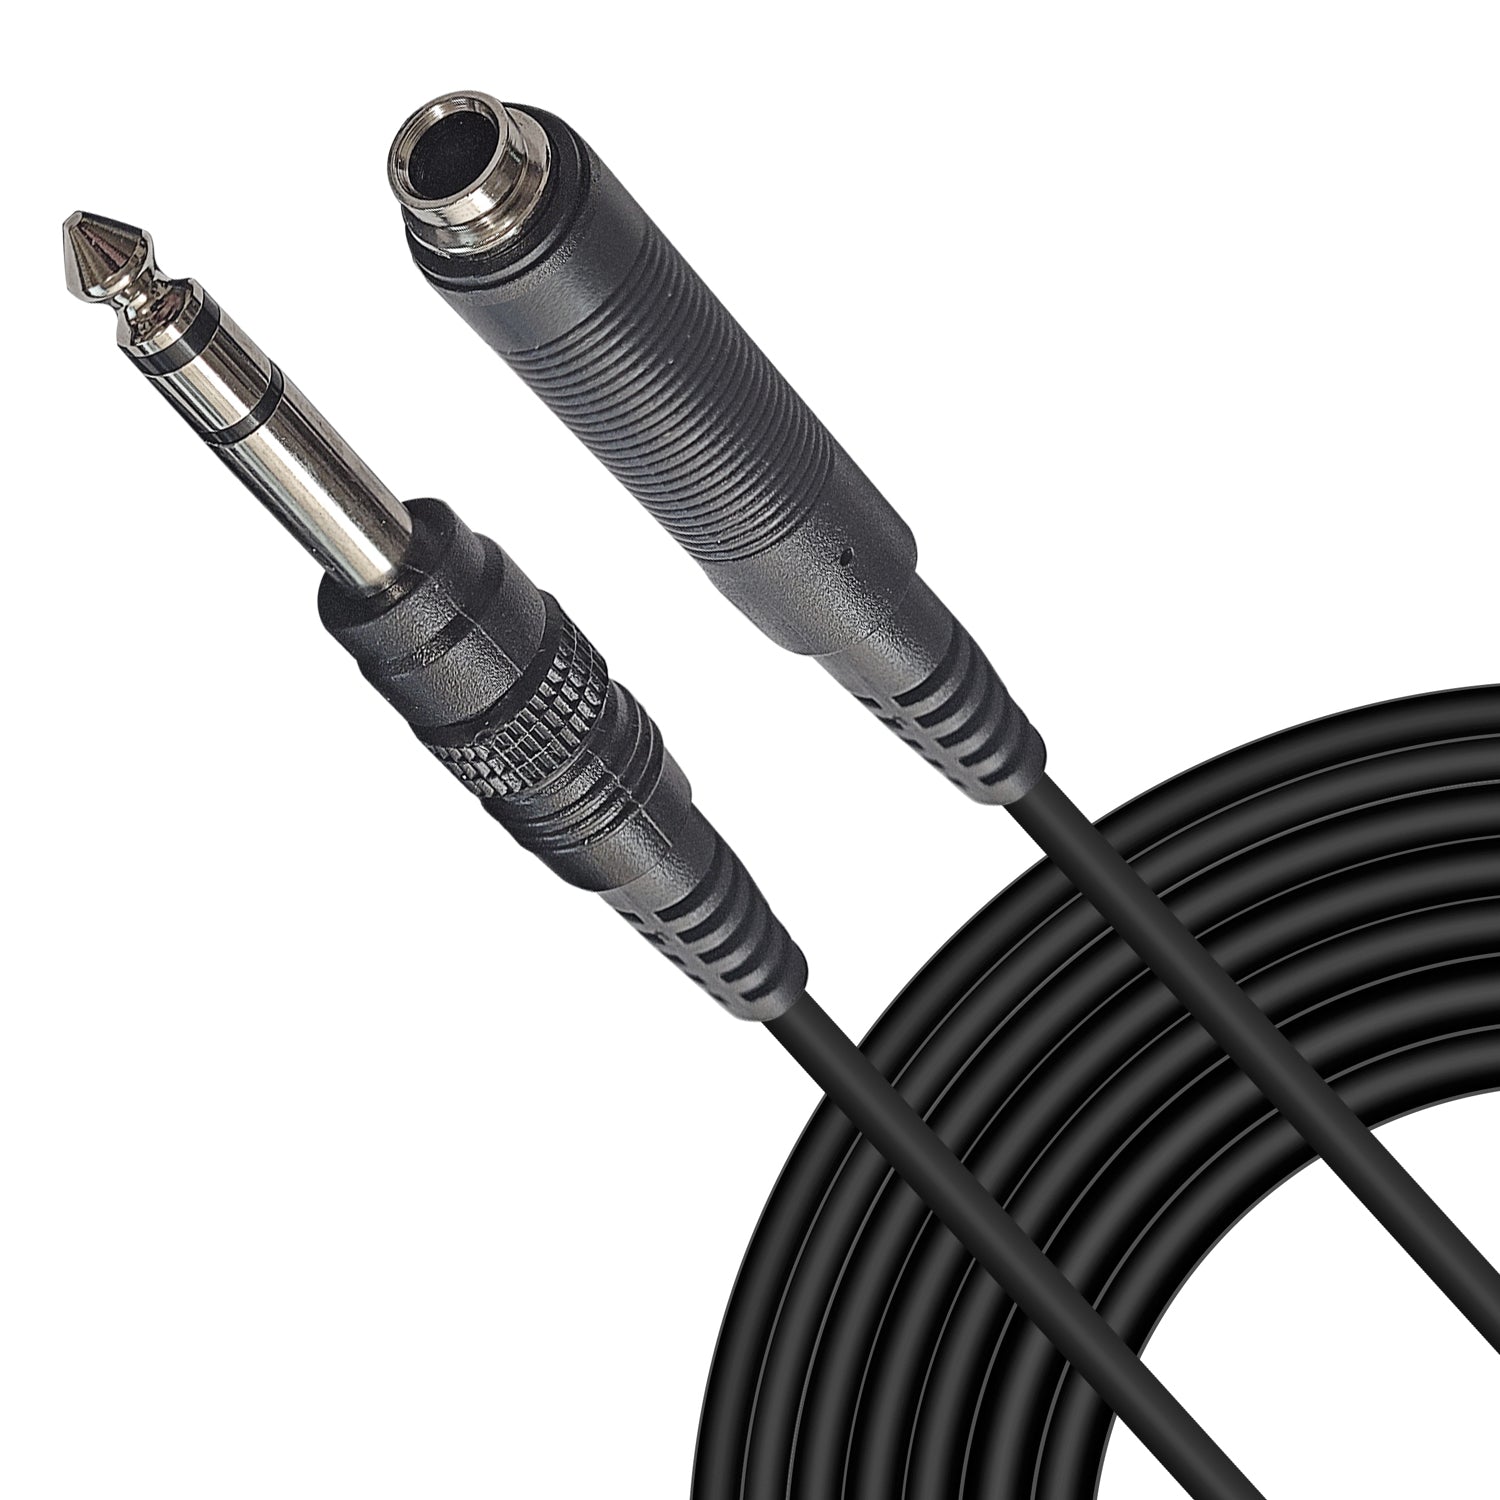 AxcessAbles 1/4-inch (6.35mm) TRS Male to 1/4-inch (6.35mm) TRS Female Headphone Extension Cable (10ft) for Microphones, Audio Applications, Home Studios, Professional Studios